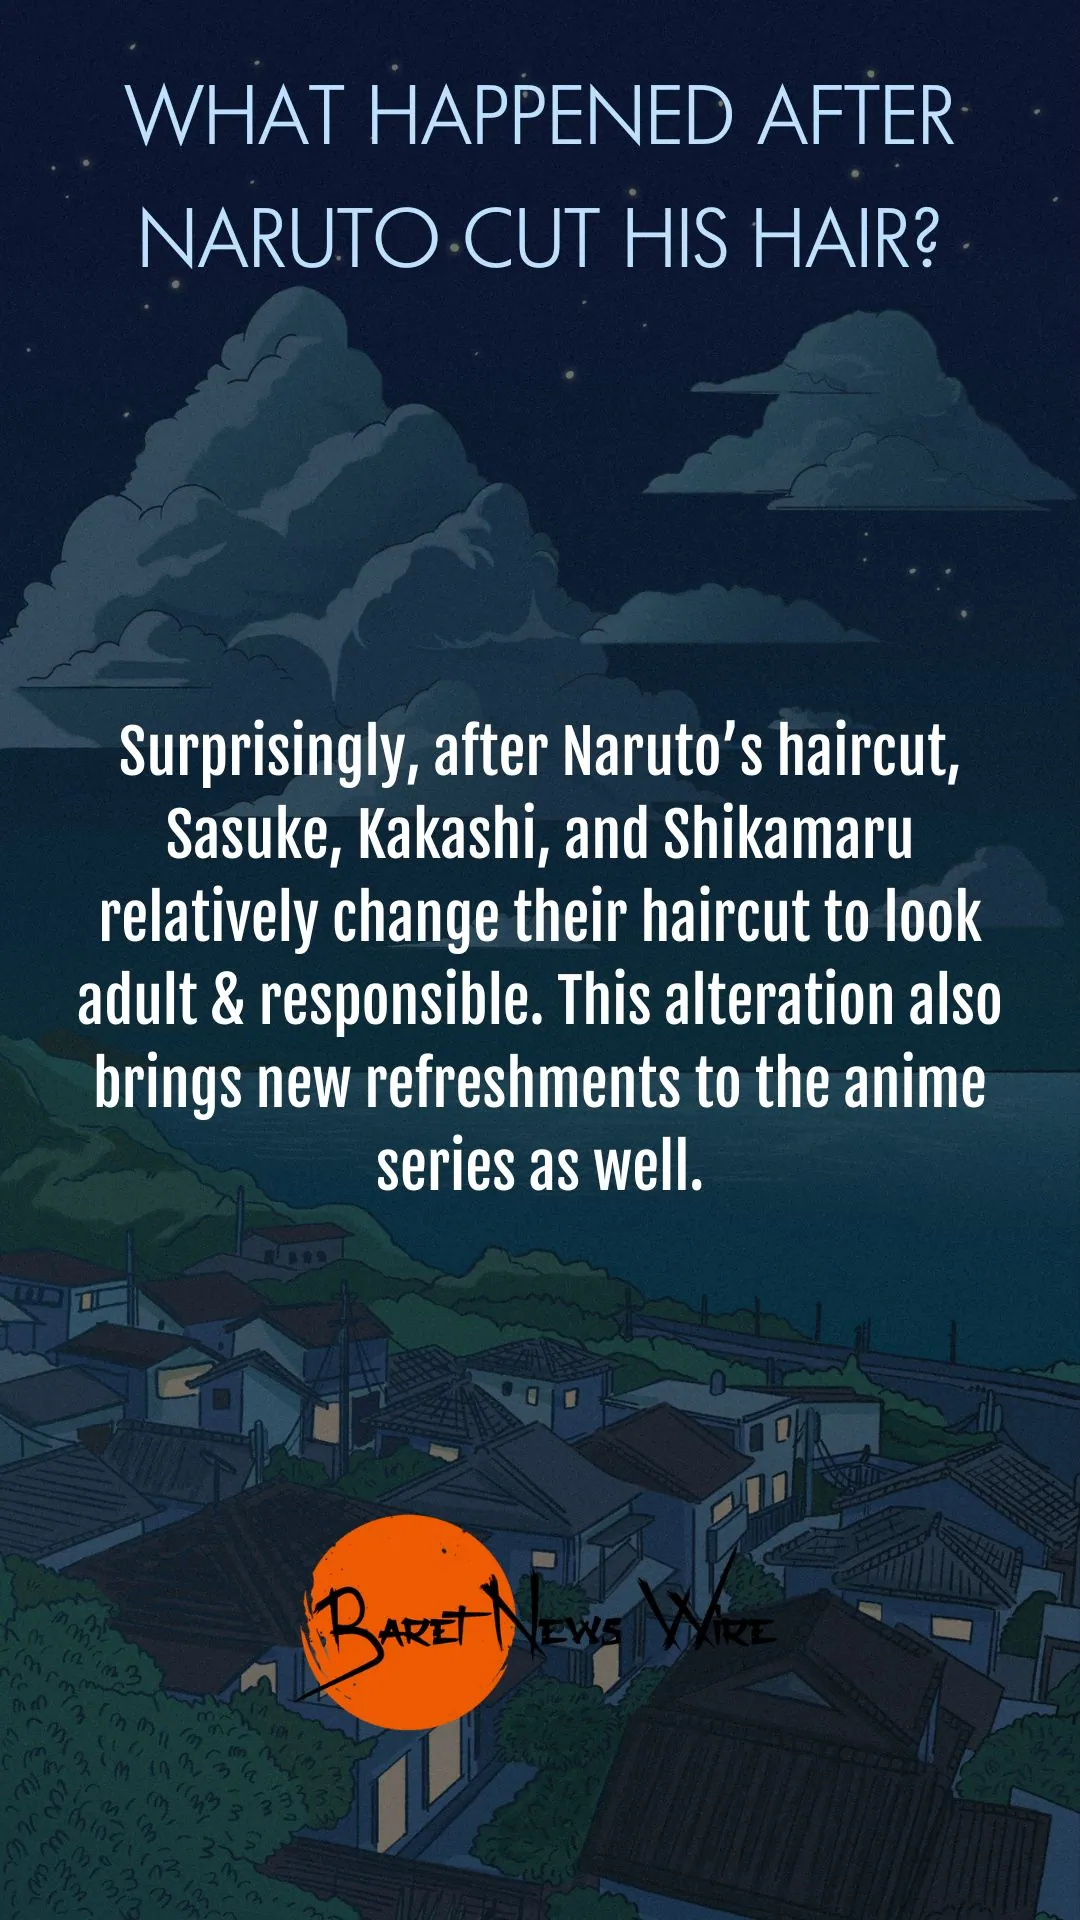 What happened after Naruto cut his hair?